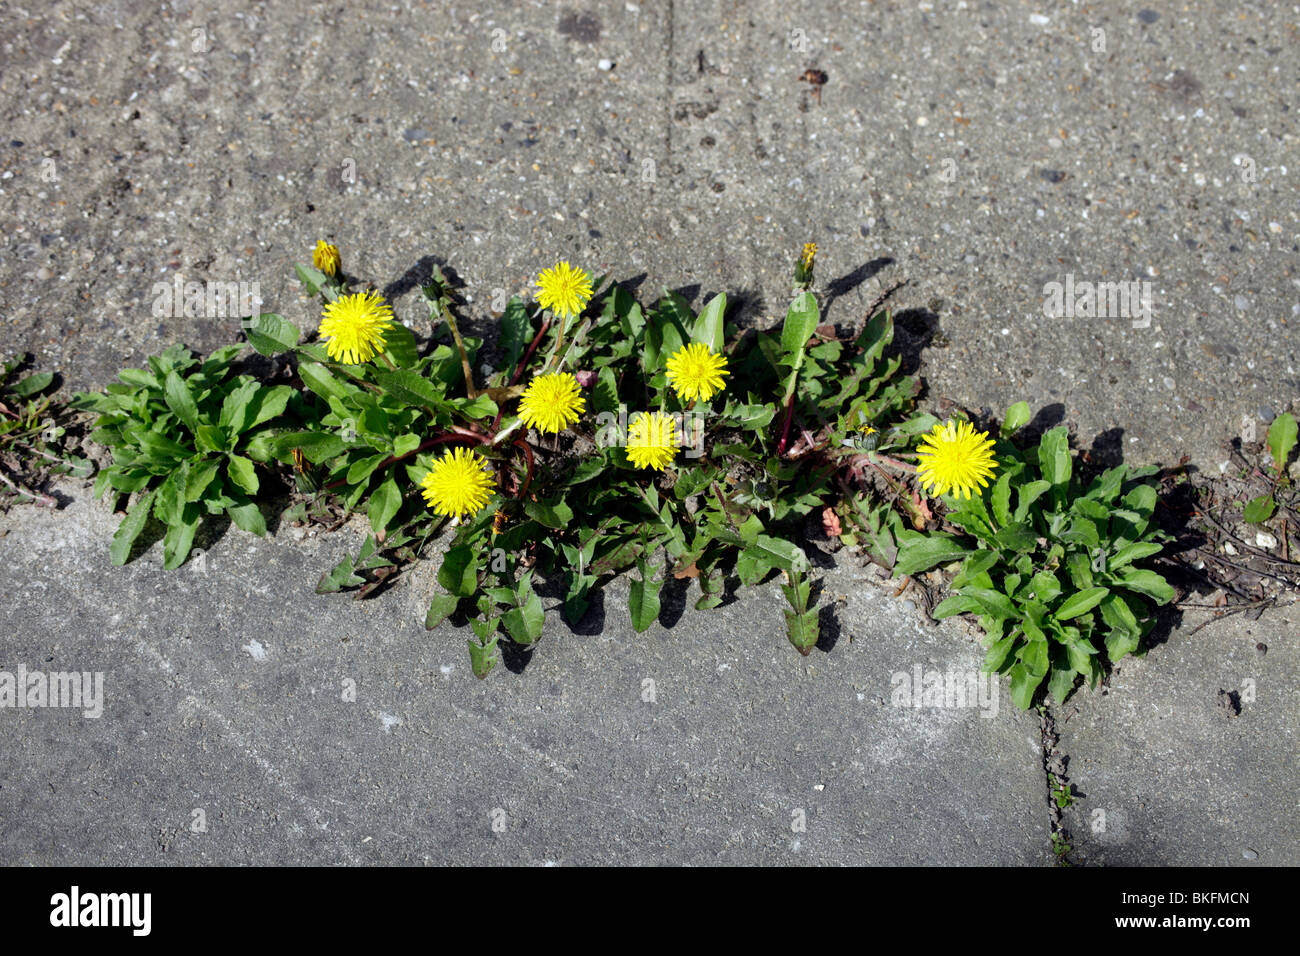 Dandelions and other weeds in paving Stock Photo